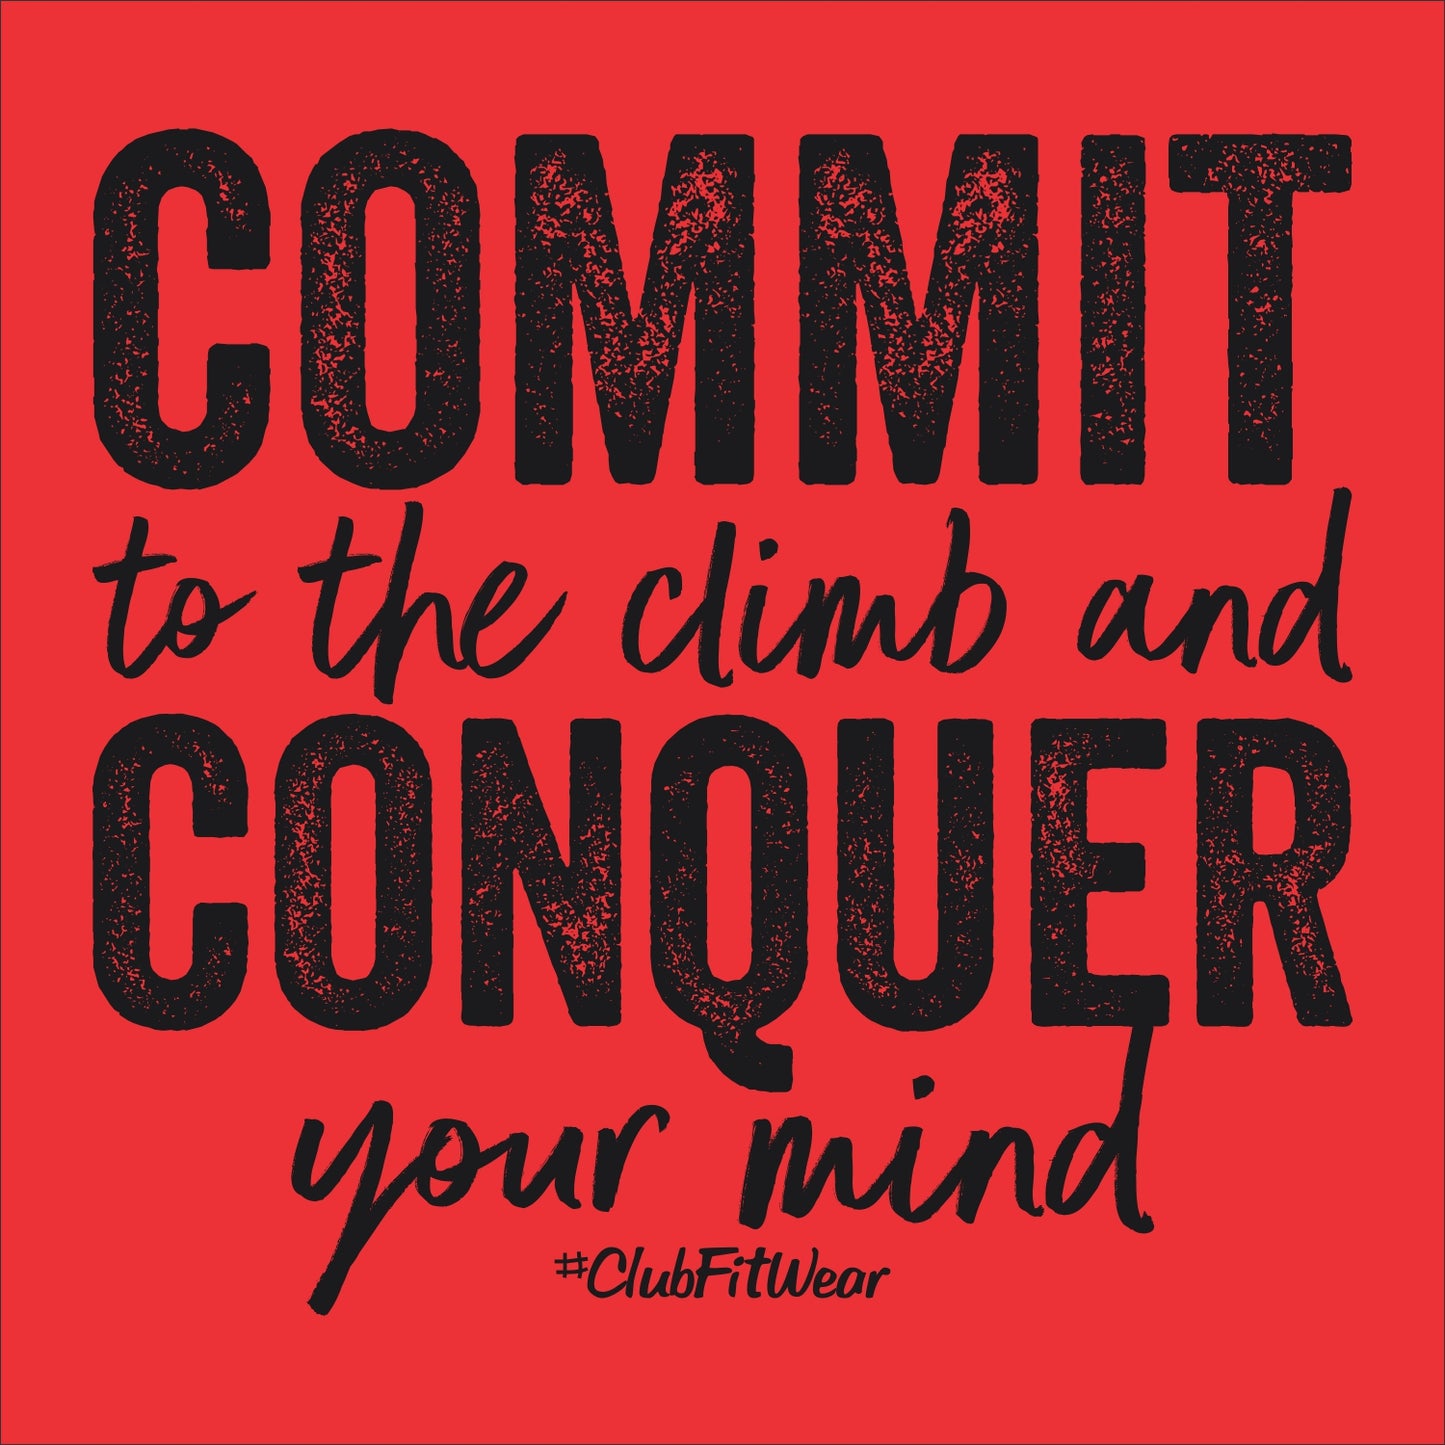 Commit to the Climb and Conquer your Mind